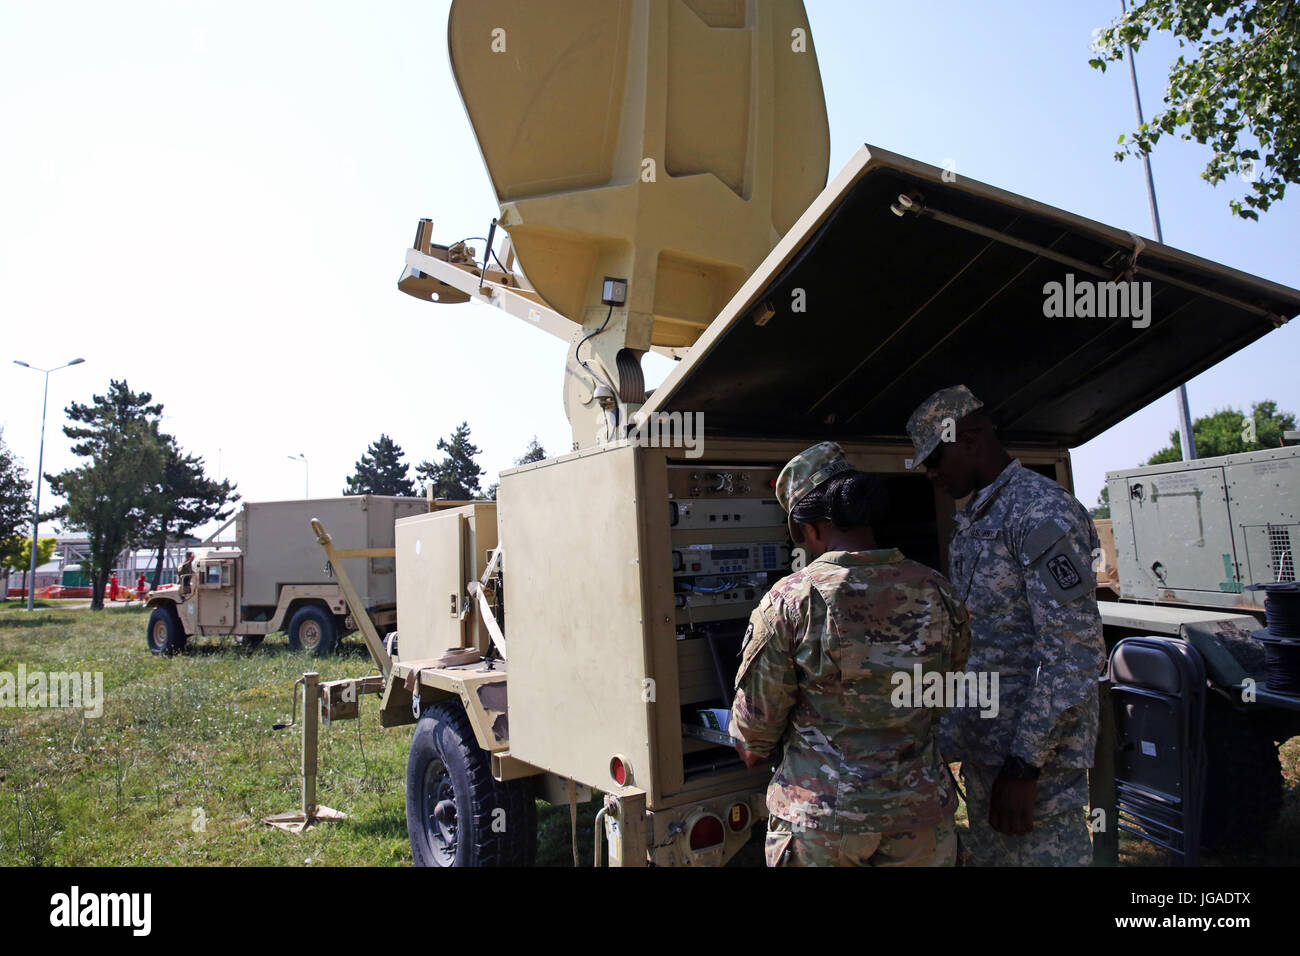 U.S. Army Spc. Kendra Smith and Spc. Antwan Campbell, both assigned to Charlie Company, 86th Expeditionary Signal Battalion, 11th Signal Brigade, work to establish a satellite link June 29, 2017 at Mihail Kogalniceanu Air Base, Romania. The 86th Expeditionary Signal Bn. from Fort Bliss, Texas is augmenting 2nd Theater Signal Brigade with additional tactical signal assets and capability for exercise Saber Guardian 17, a U.S. Army Europe-led, multinational exercise, taking place in Bulgaria, Hungary and Romania July 11-20, 2017. (U.S. Army photo by William B. King) Stock Photo